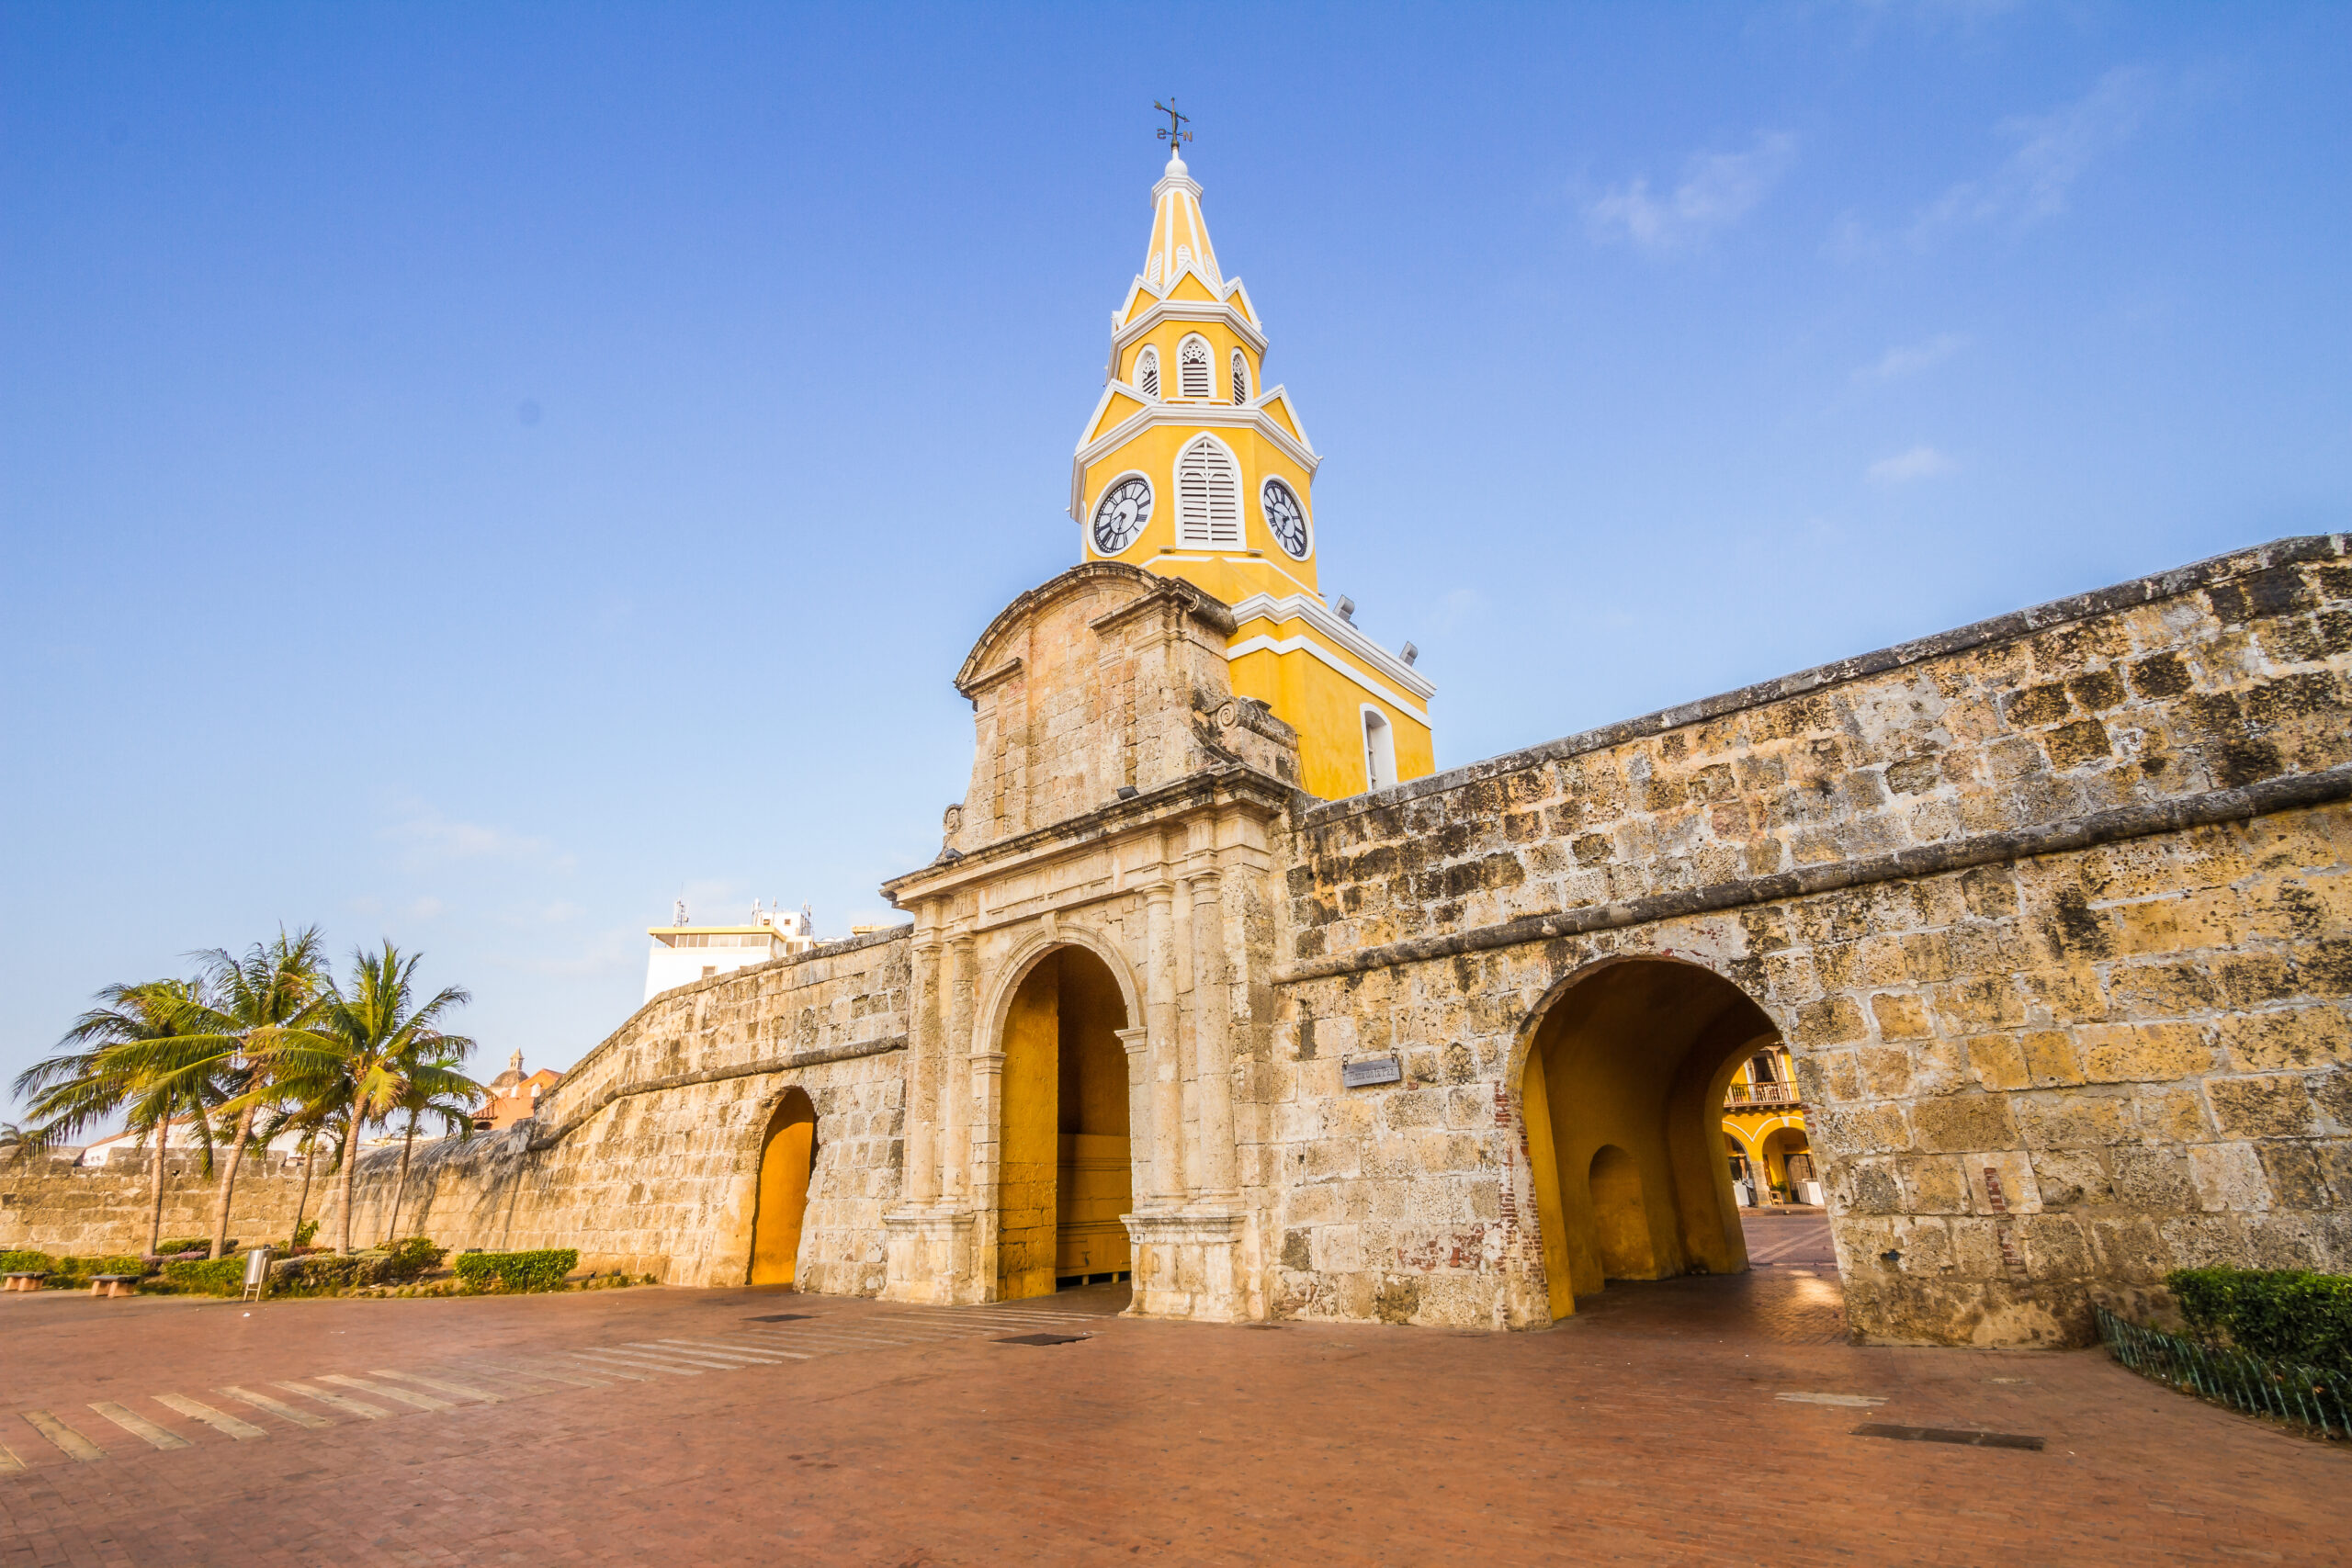 Clock Tower Monument in Cartagena, Colombia